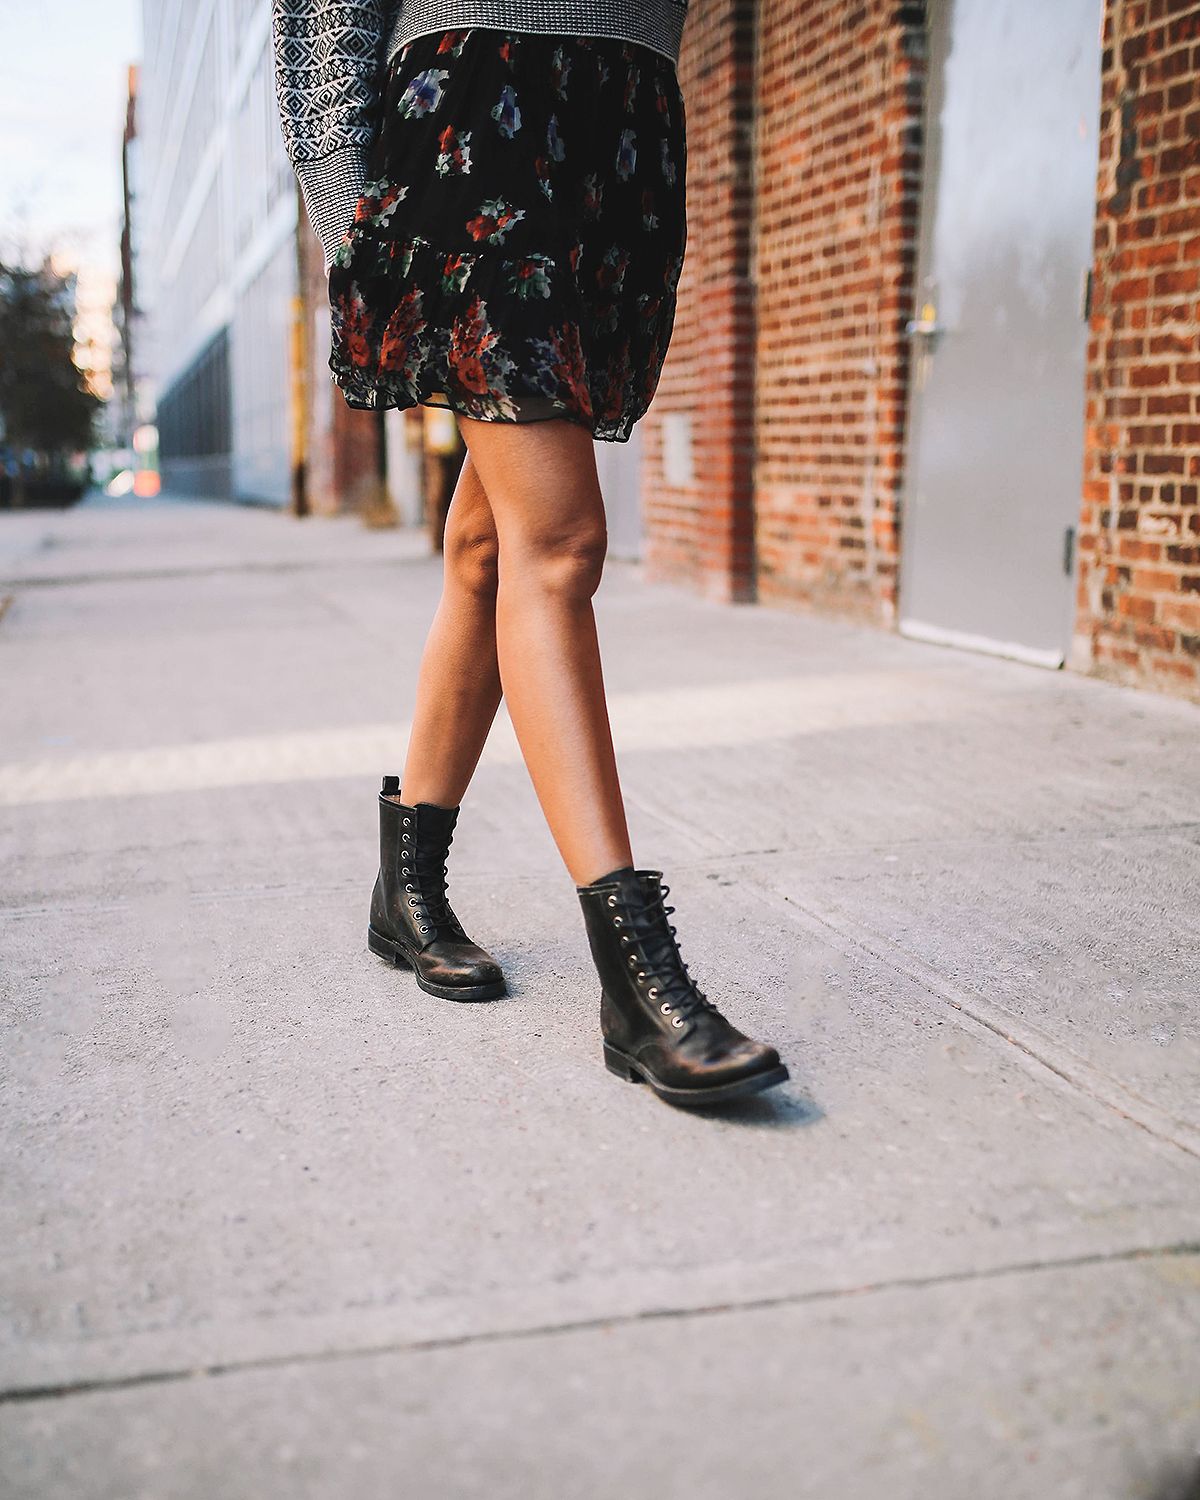 Frye Combat Boots on Sale at Nordstrom